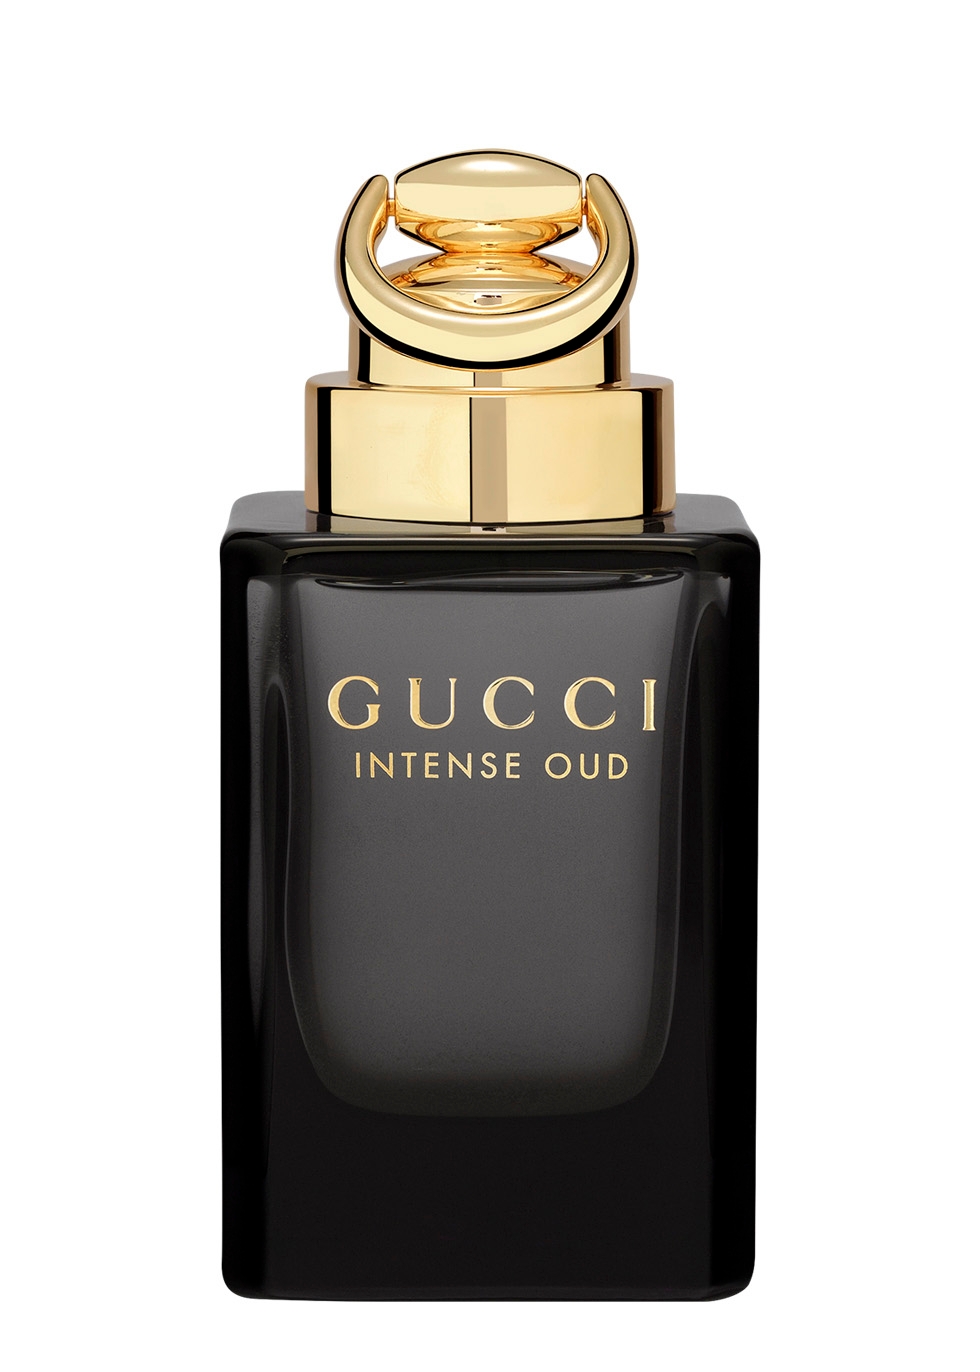 gucci oud for him